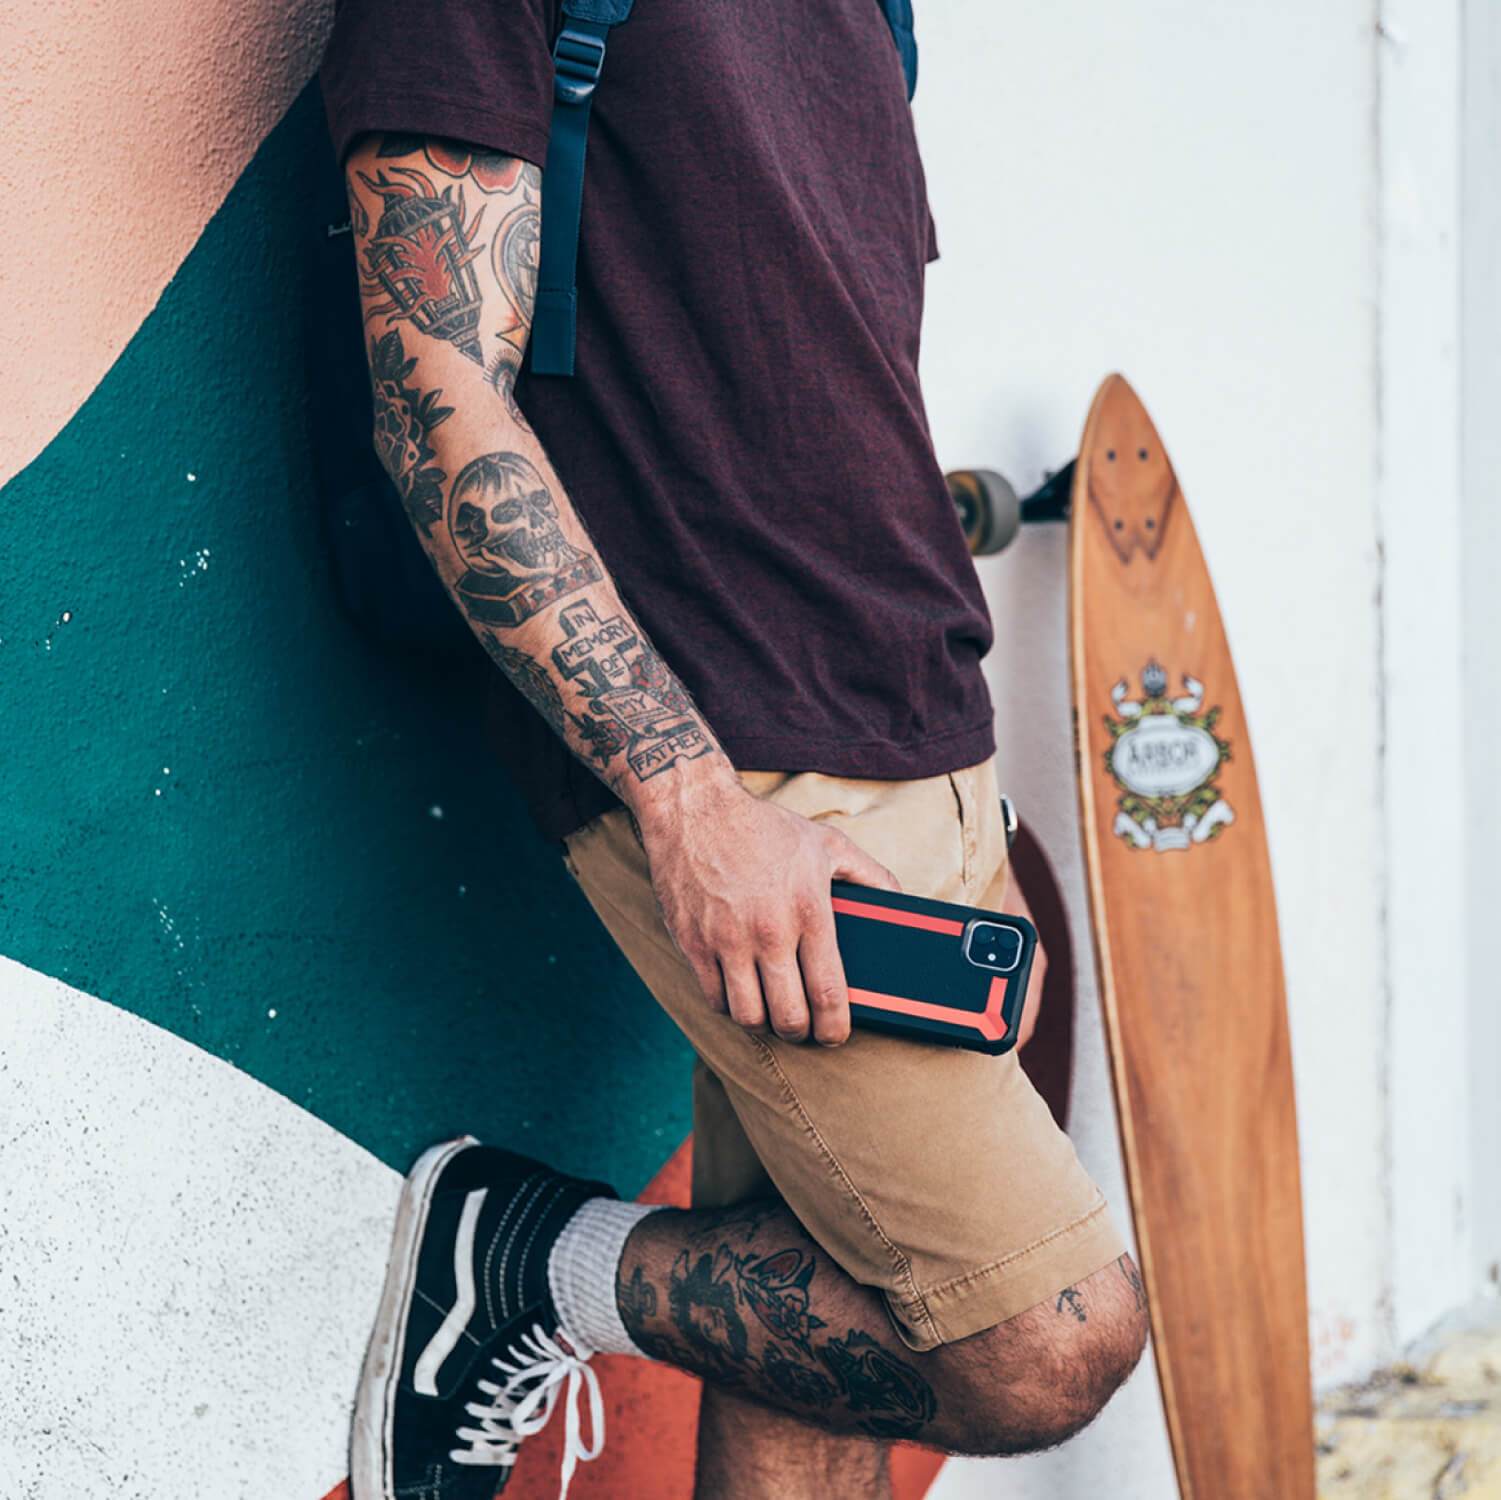 A man with tattoos leaning against a wall with a Raptic TACTICAL case on his iPhone 11 Pro.